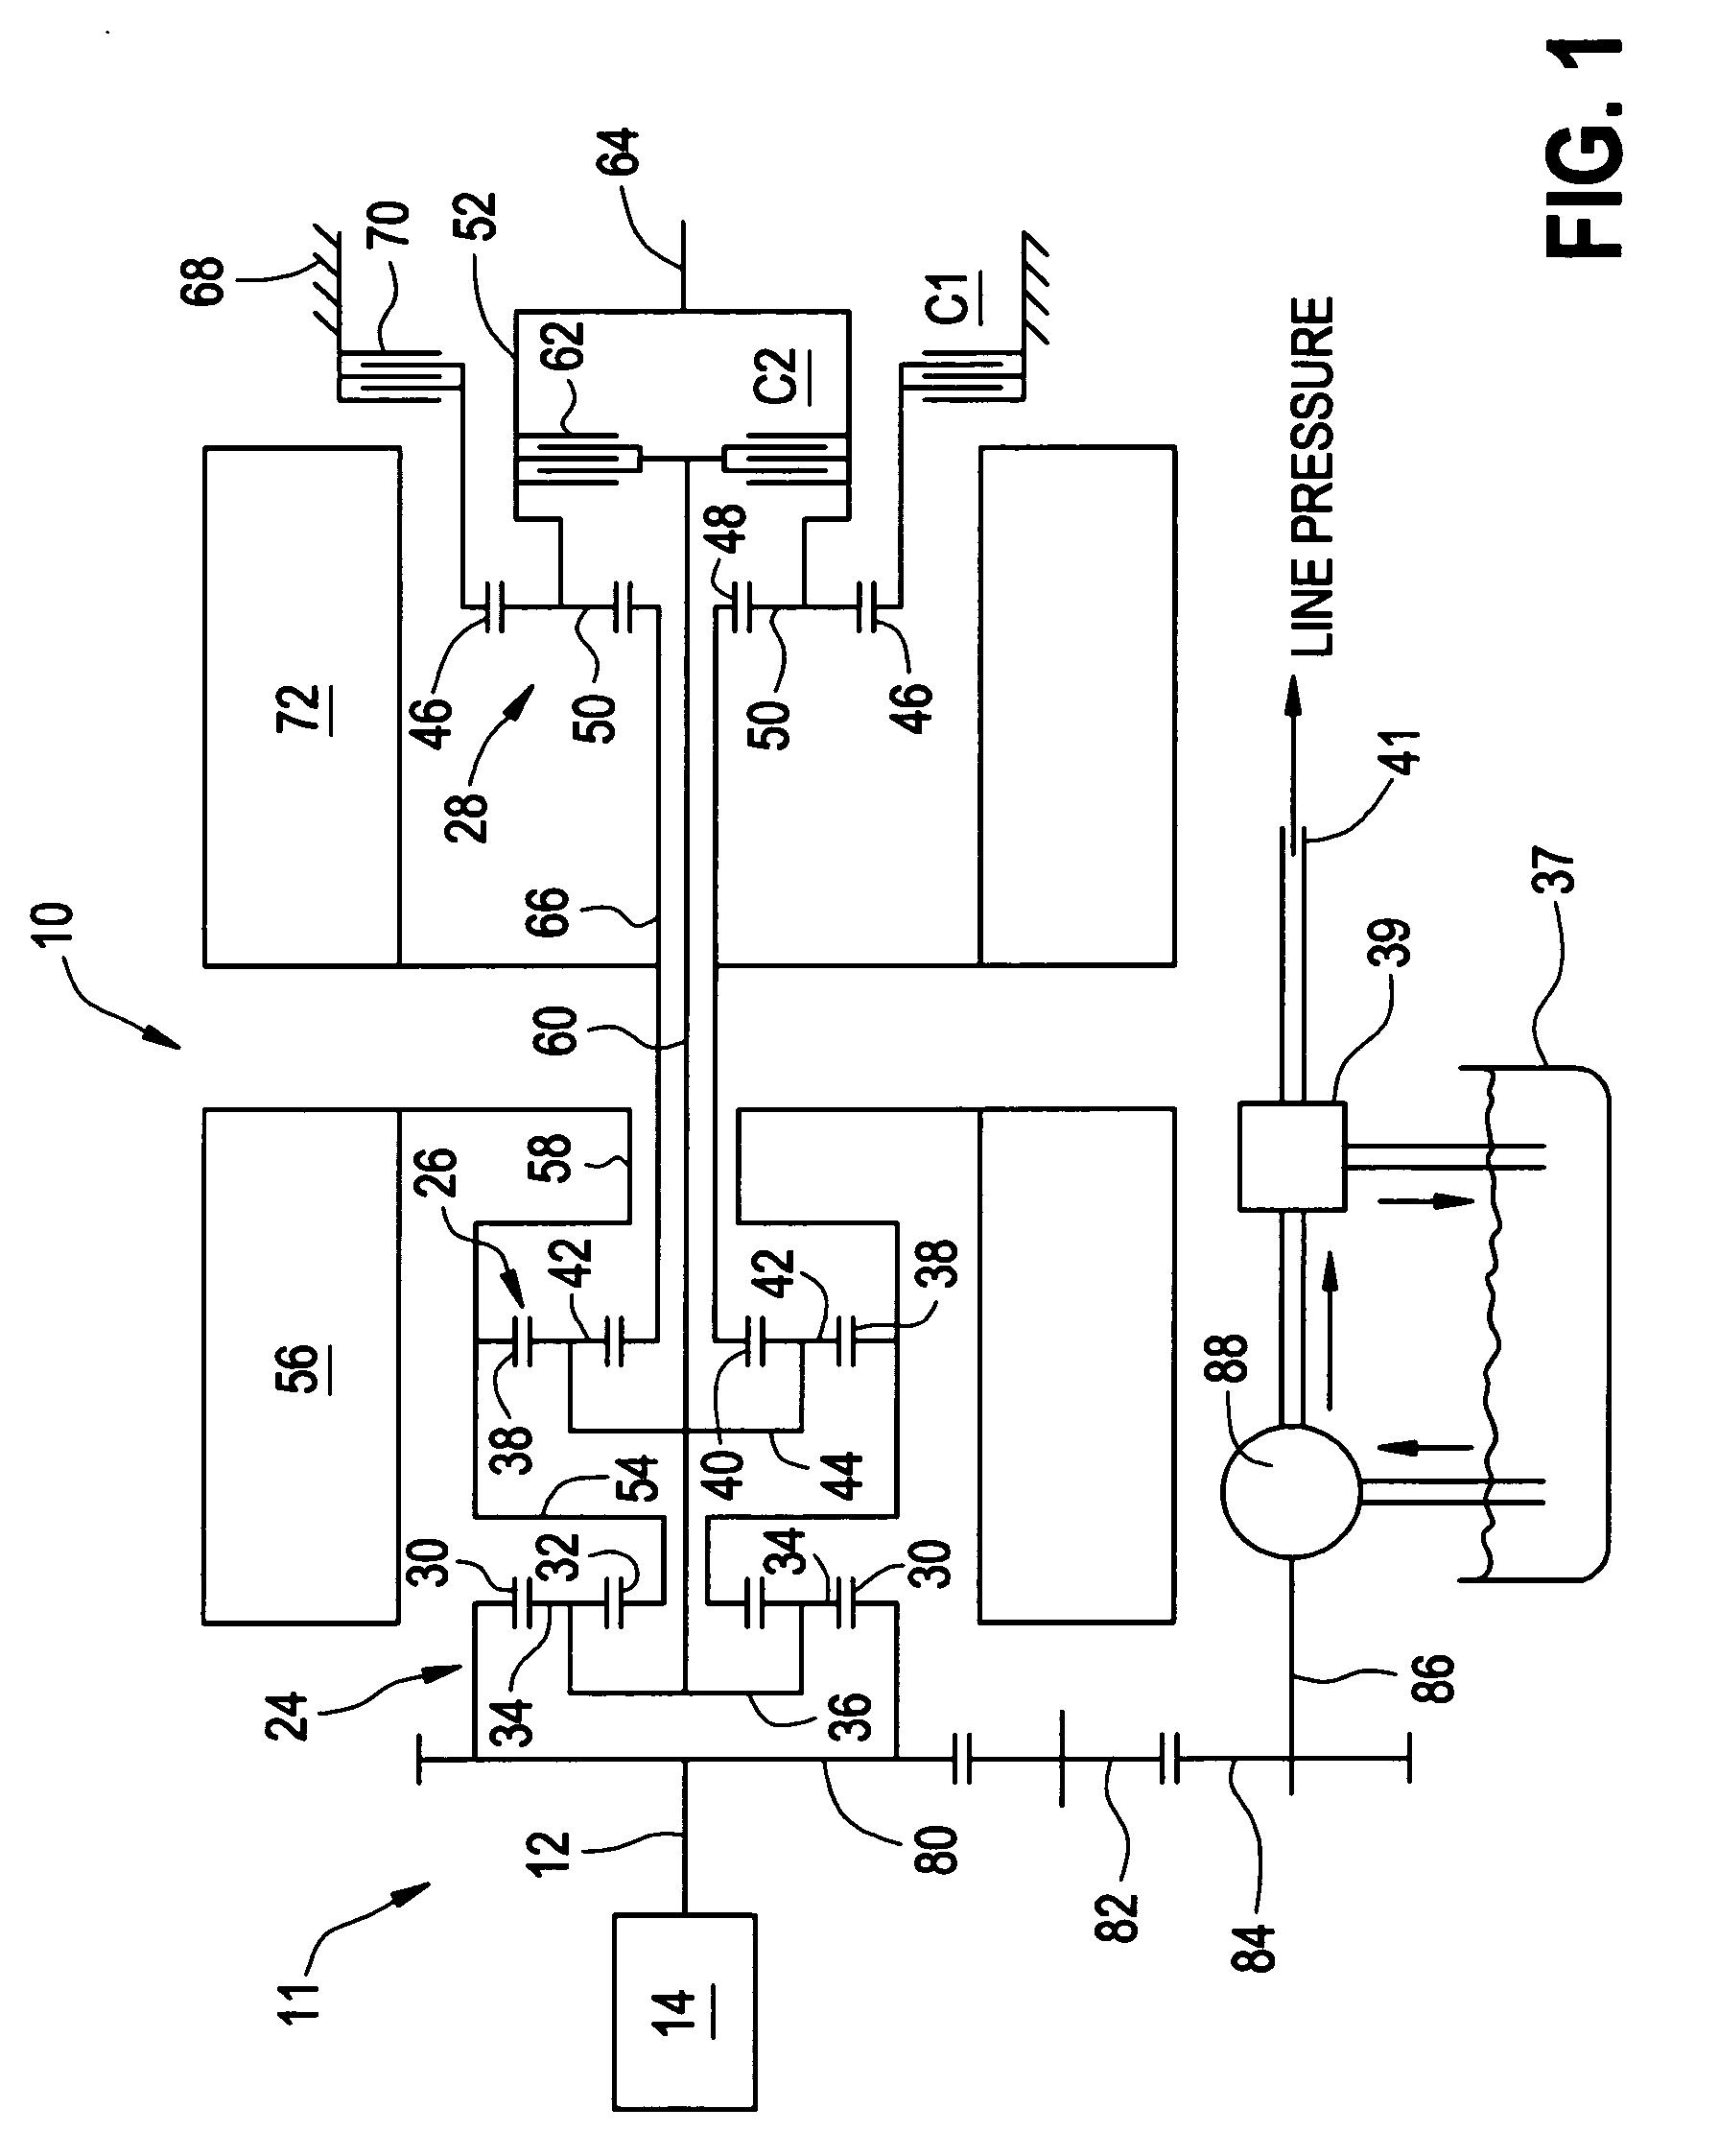 Method of providing electric motor torque reserve in a hybrid electric vehicle